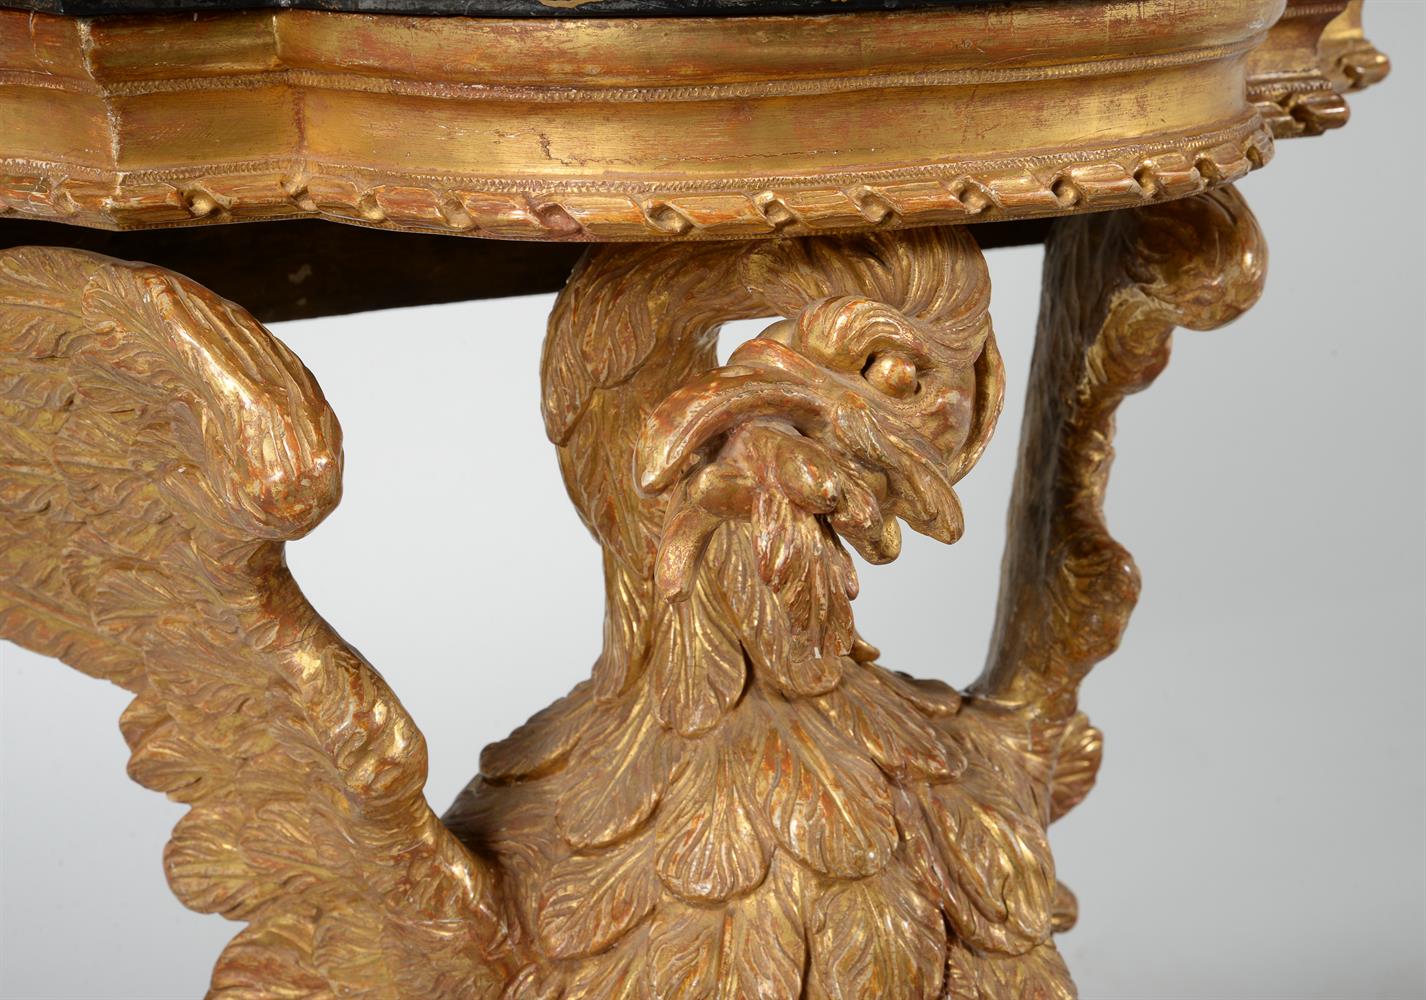 A GEORGE III GILTWOOD EAGLE CONSOLE TABLE, SECOND HALF 18TH CENTURY - Image 4 of 4